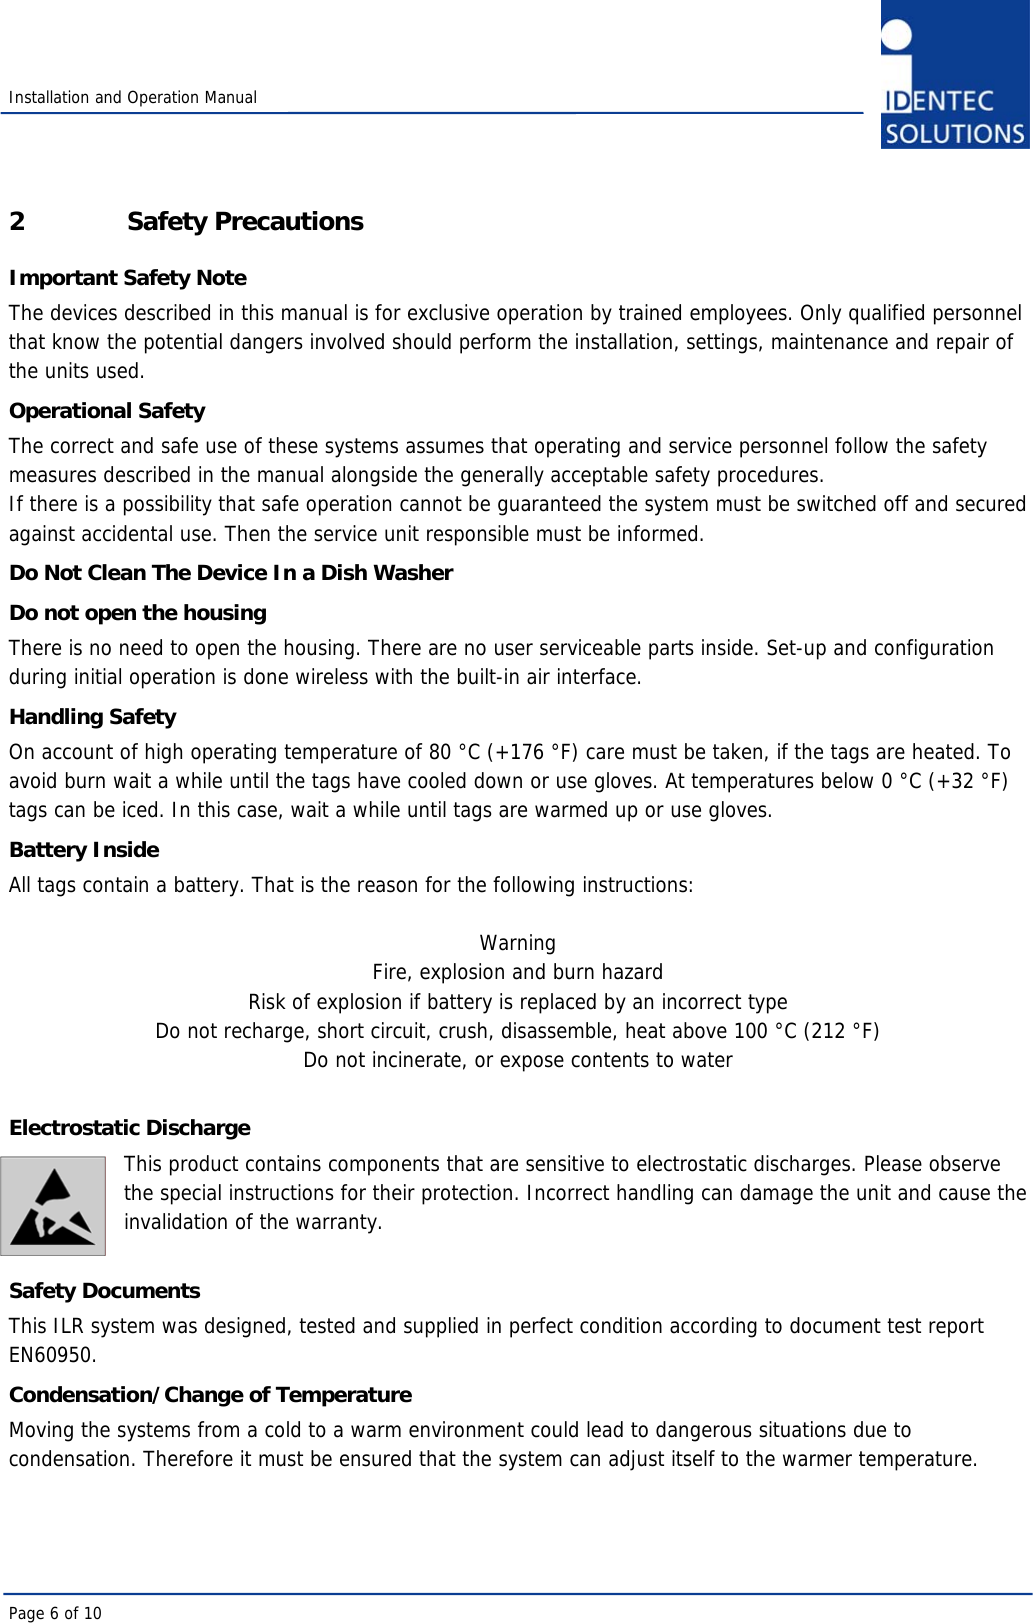   Installation and Operation Manual Page 6 of 10 2 Safety Precautions Important Safety Note The devices described in this manual is for exclusive operation by trained employees. Only qualified personnel that know the potential dangers involved should perform the installation, settings, maintenance and repair of the units used. Operational Safety The correct and safe use of these systems assumes that operating and service personnel follow the safety measures described in the manual alongside the generally acceptable safety procedures. If there is a possibility that safe operation cannot be guaranteed the system must be switched off and secured against accidental use. Then the service unit responsible must be informed. Do Not Clean The Device In a Dish Washer Do not open the housing There is no need to open the housing. There are no user serviceable parts inside. Set-up and configuration during initial operation is done wireless with the built-in air interface. Handling Safety On account of high operating temperature of 80 °C (+176 °F) care must be taken, if the tags are heated. To avoid burn wait a while until the tags have cooled down or use gloves. At temperatures below 0 °C (+32 °F) tags can be iced. In this case, wait a while until tags are warmed up or use gloves.  Battery Inside All tags contain a battery. That is the reason for the following instructions:  Warning Fire, explosion and burn hazard Risk of explosion if battery is replaced by an incorrect type Do not recharge, short circuit, crush, disassemble, heat above 100 °C (212 °F) Do not incinerate, or expose contents to water  Electrostatic Discharge This product contains components that are sensitive to electrostatic discharges. Please observe the special instructions for their protection. Incorrect handling can damage the unit and cause the invalidation of the warranty.  Safety Documents This ILR system was designed, tested and supplied in perfect condition according to document test report EN60950. Condensation/Change of Temperature Moving the systems from a cold to a warm environment could lead to dangerous situations due to condensation. Therefore it must be ensured that the system can adjust itself to the warmer temperature. 